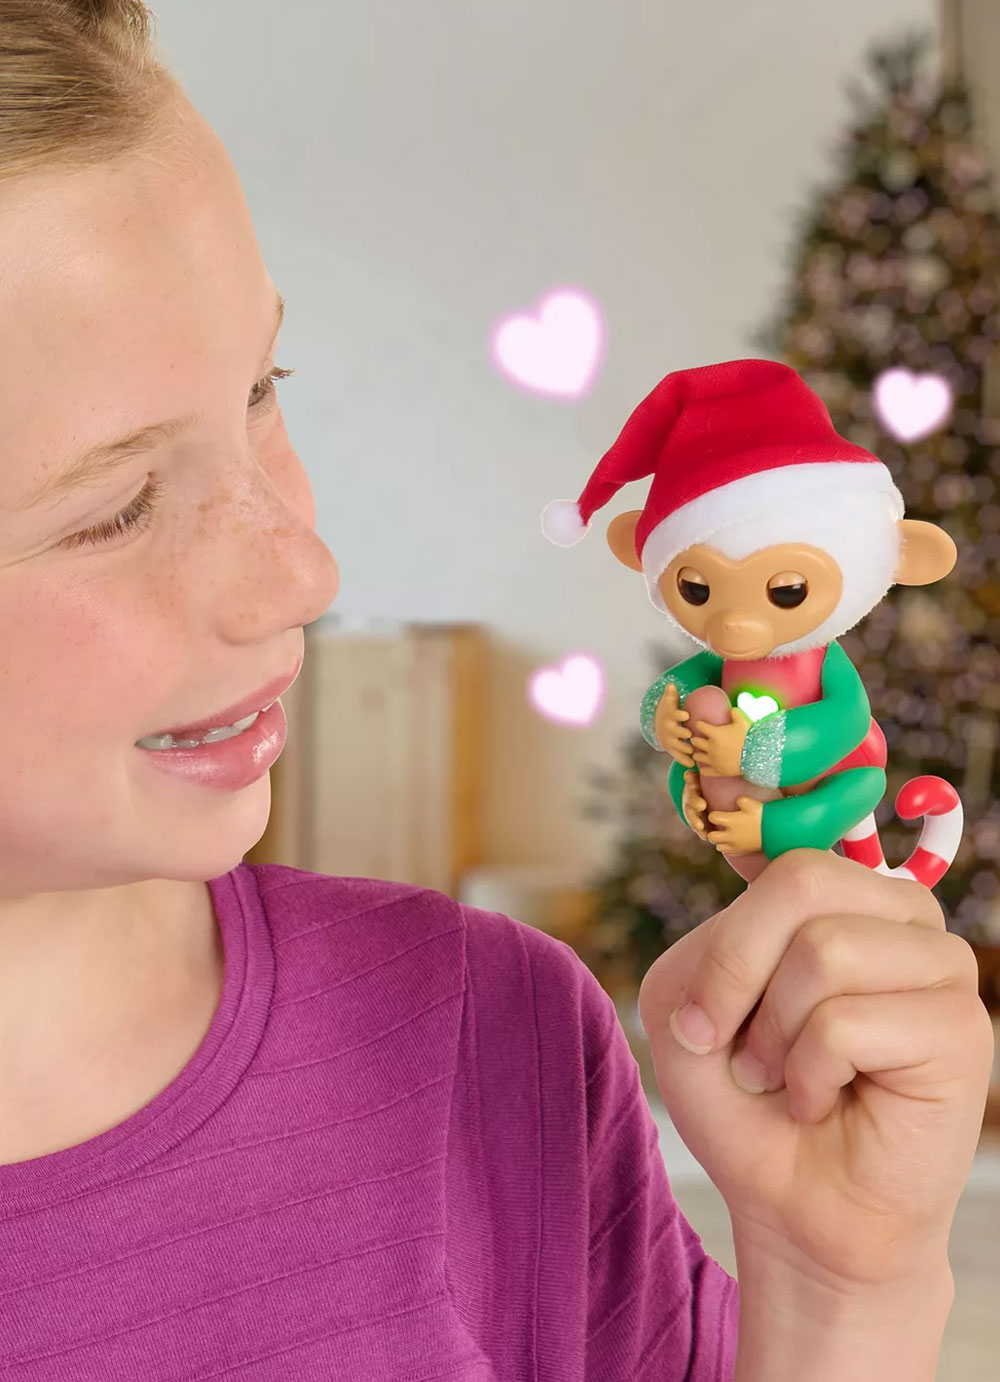 A tween girl holding a Snowbelle Fingerlings baby monkey on her finger in front of a Christmas tree